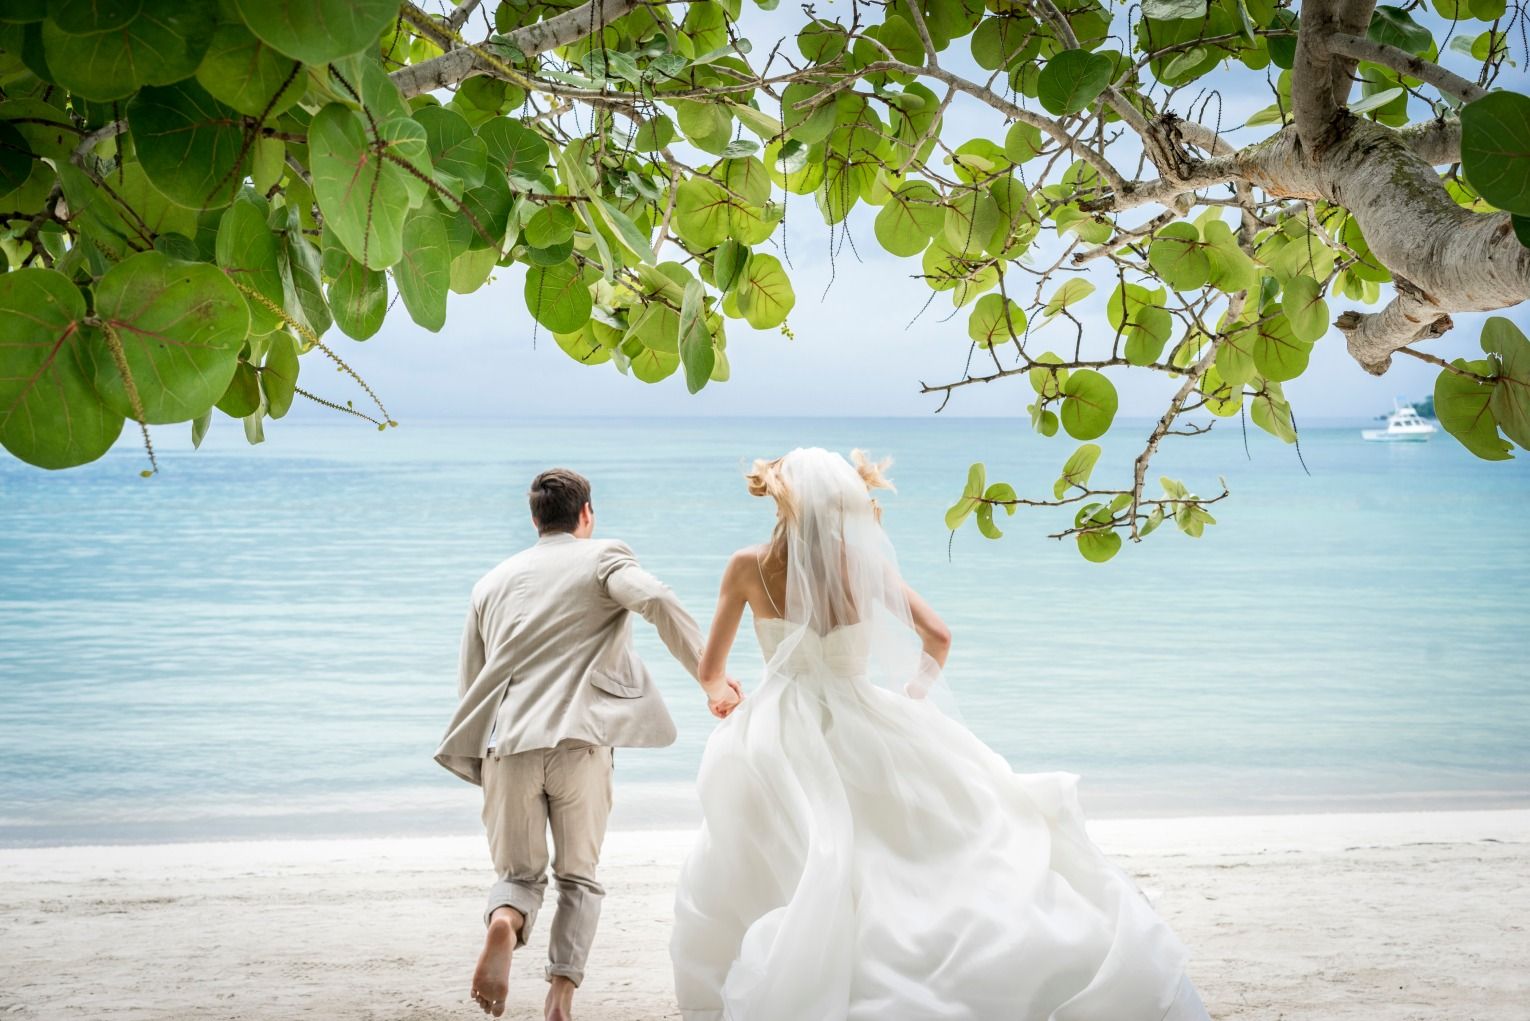 How to get a Marriage License in Jamaica - Couples Resorts